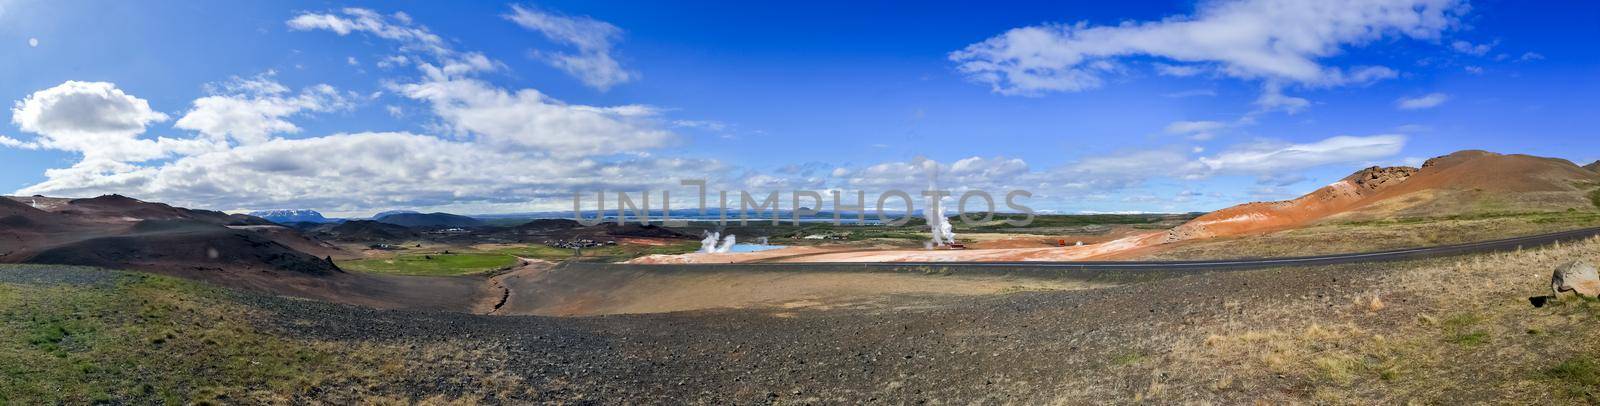 The volcanic landscape around Leirhnjukur volcano in Iceland - sulphur, rocks and wasteland. by MP_foto71